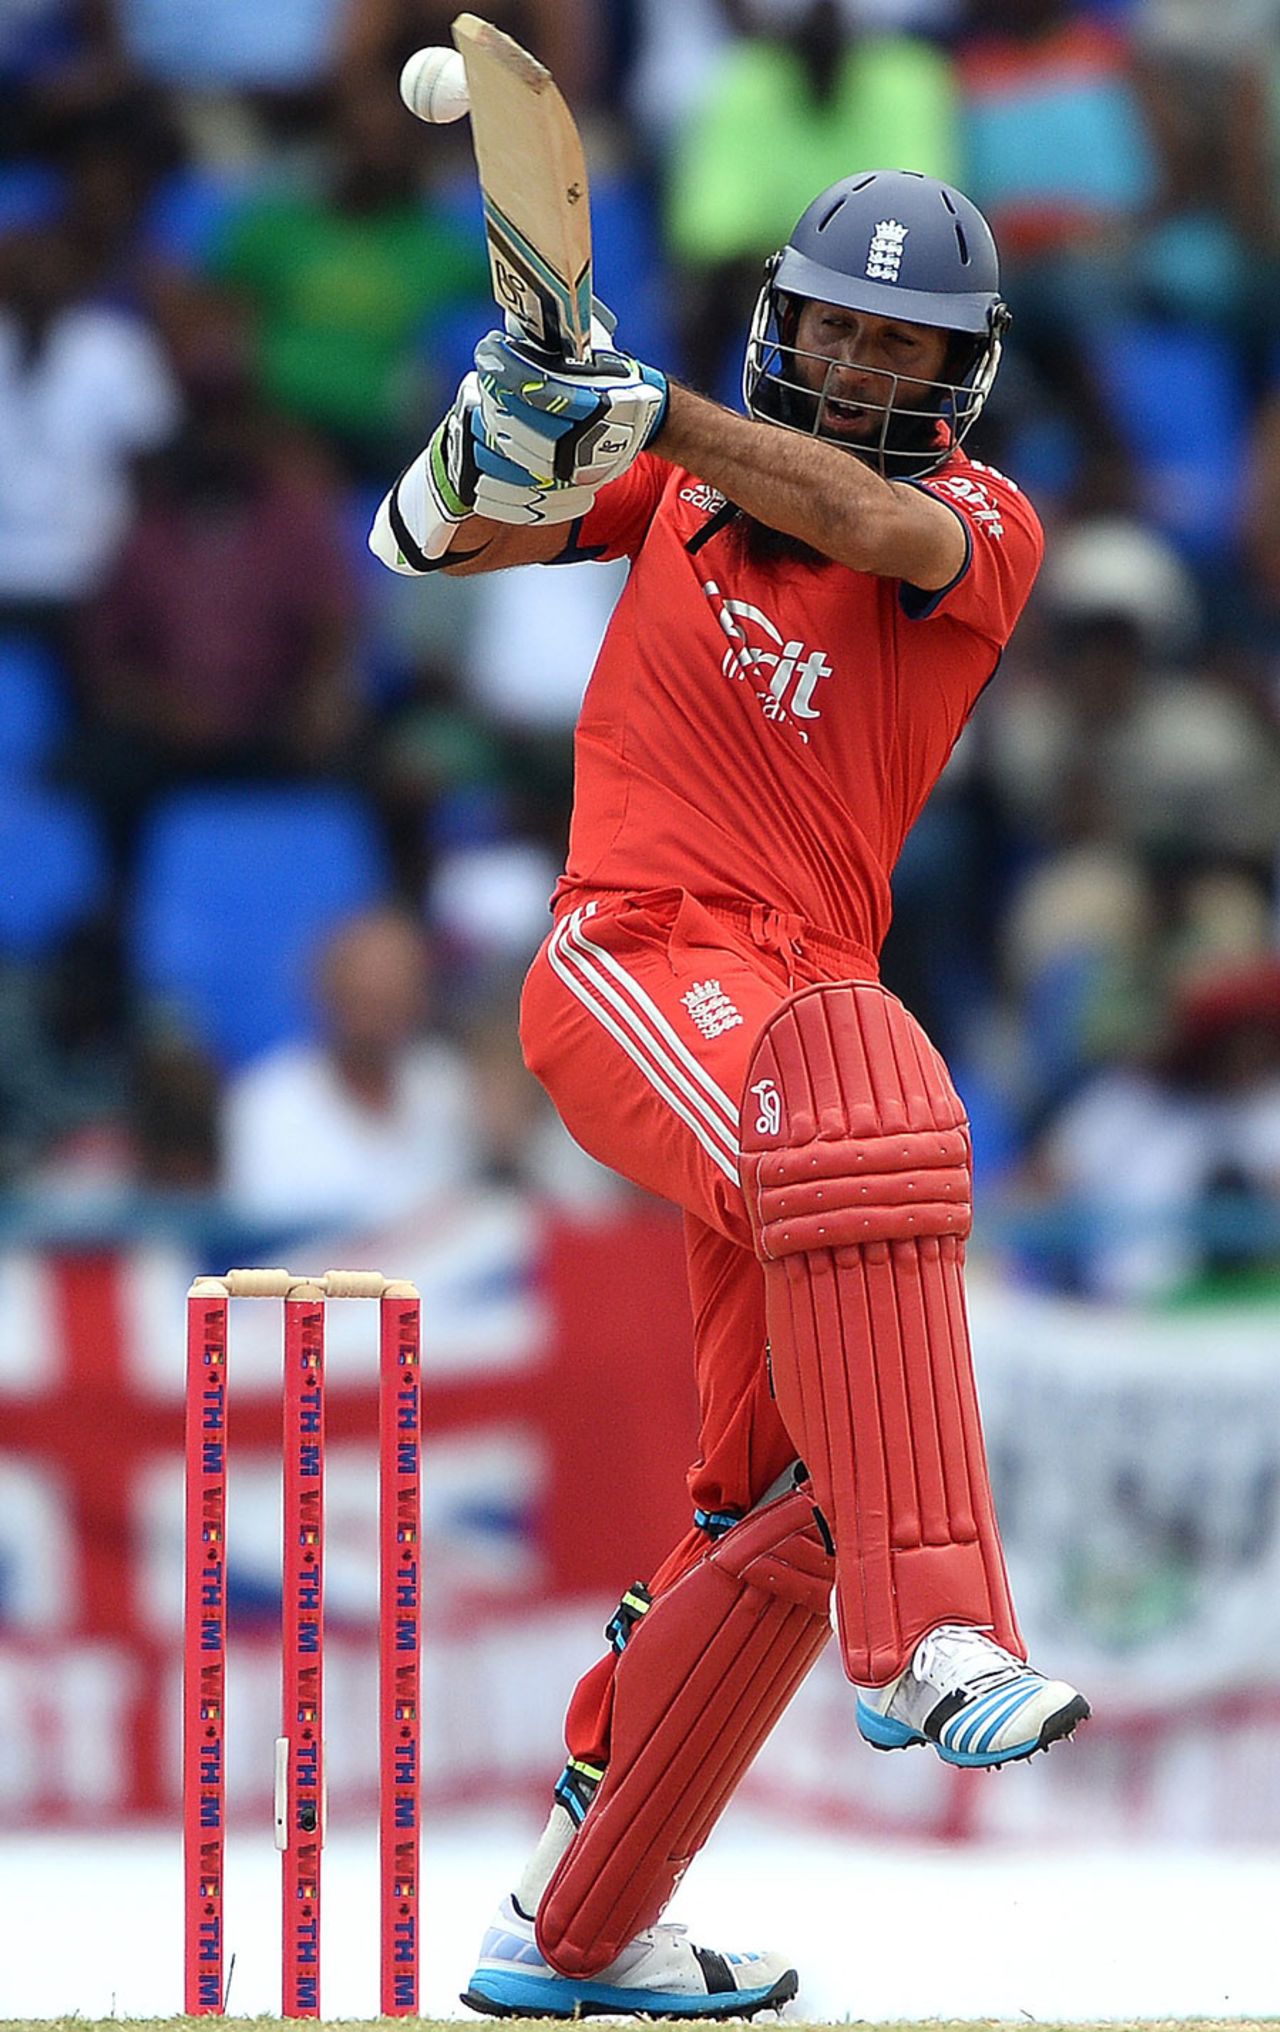 Moeen Ali hooks only to be caught at deep square leg, West Indies v England, 2nd ODI, North Sound, March 2, 2014